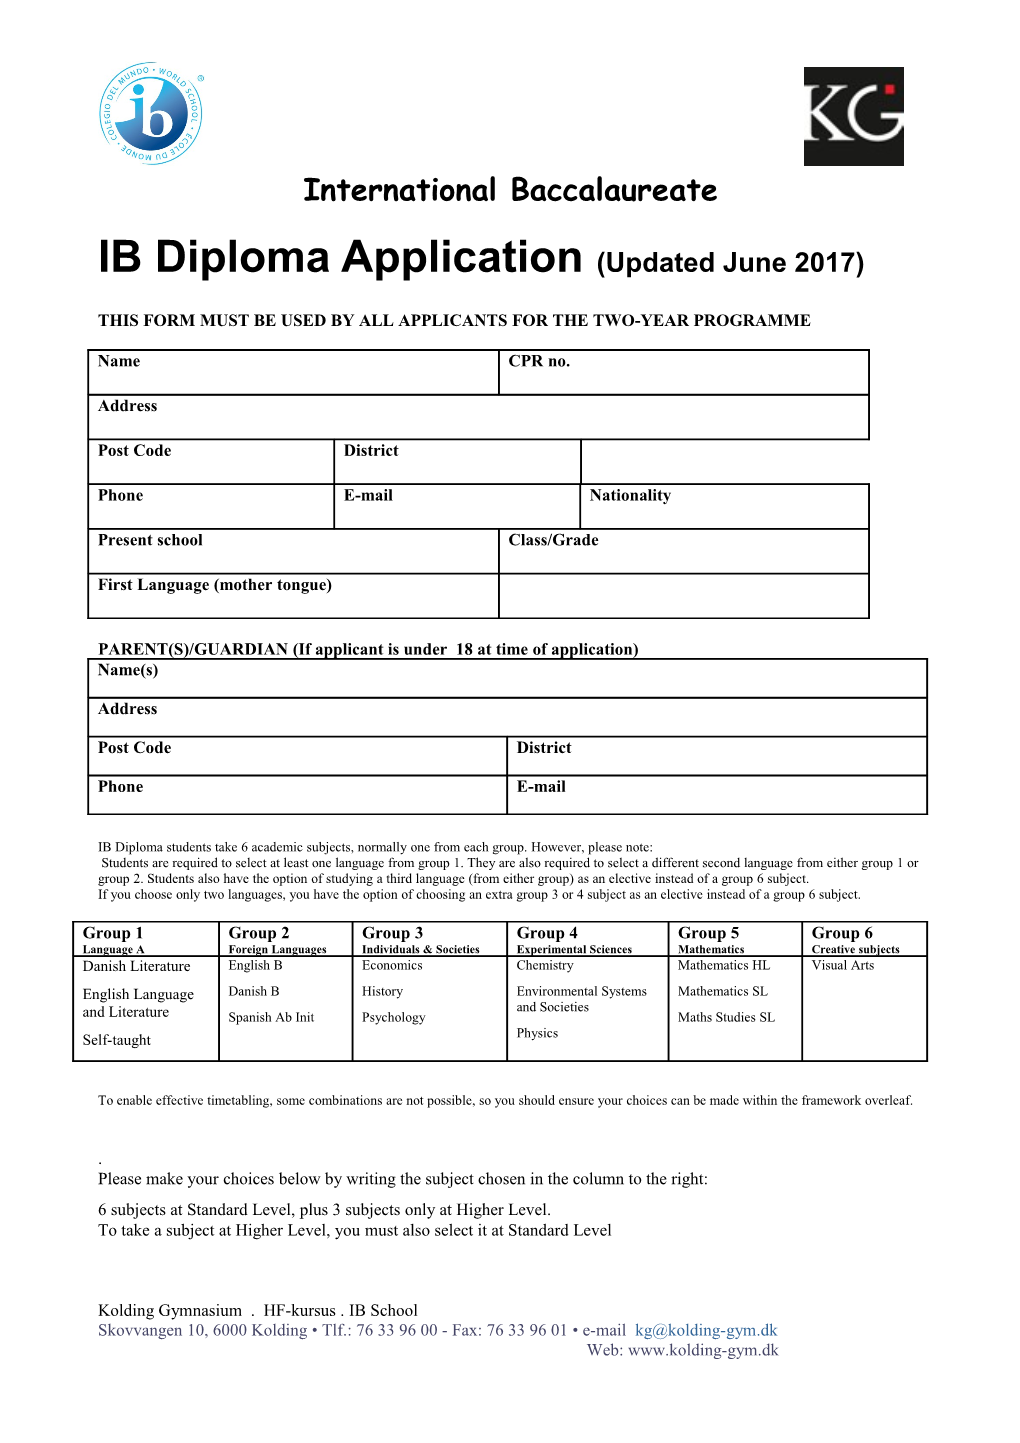 This Form Must Be Used by All Applicants for the Two-Year Programme